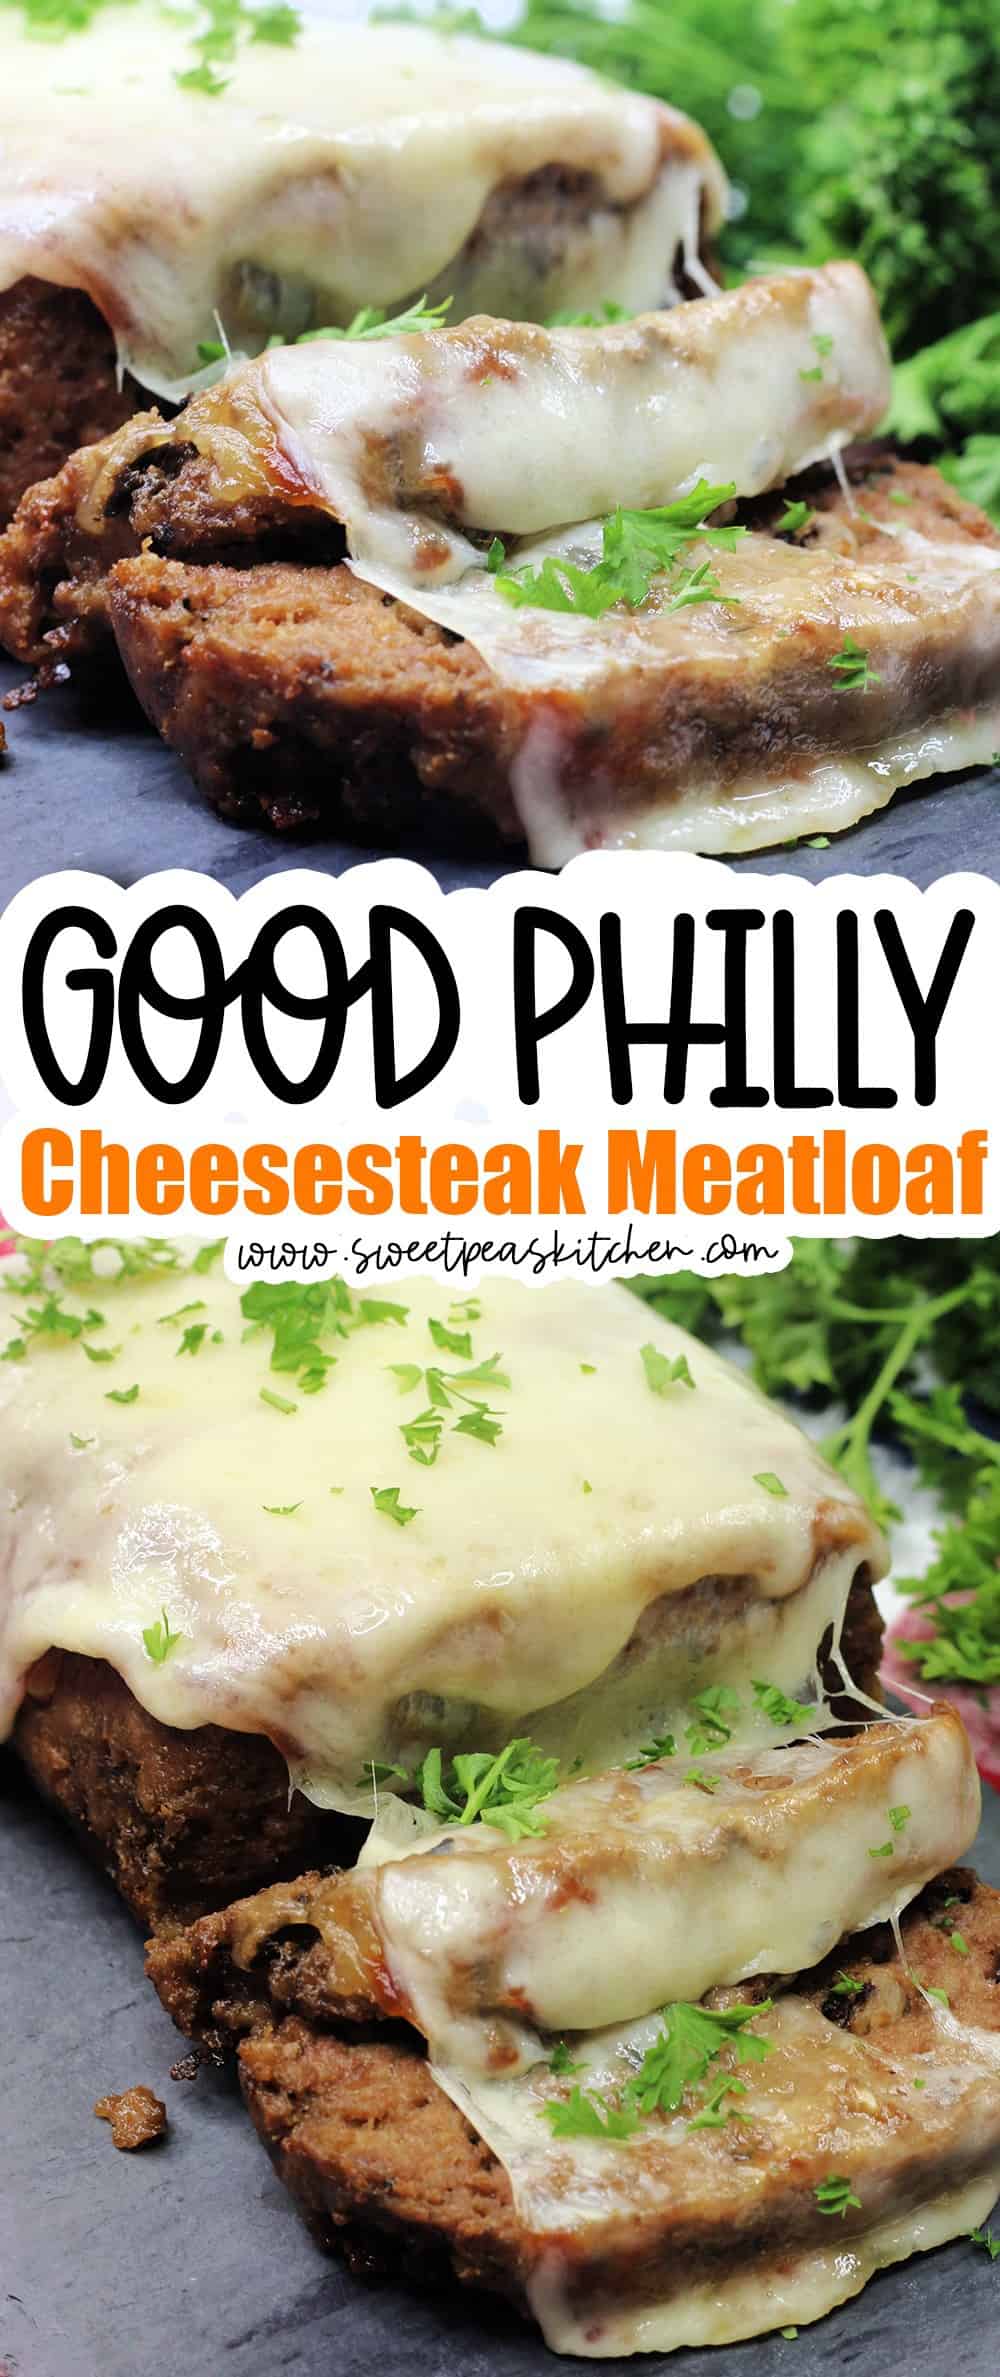 Philly Cheesesteak Meatloaf on pinterest